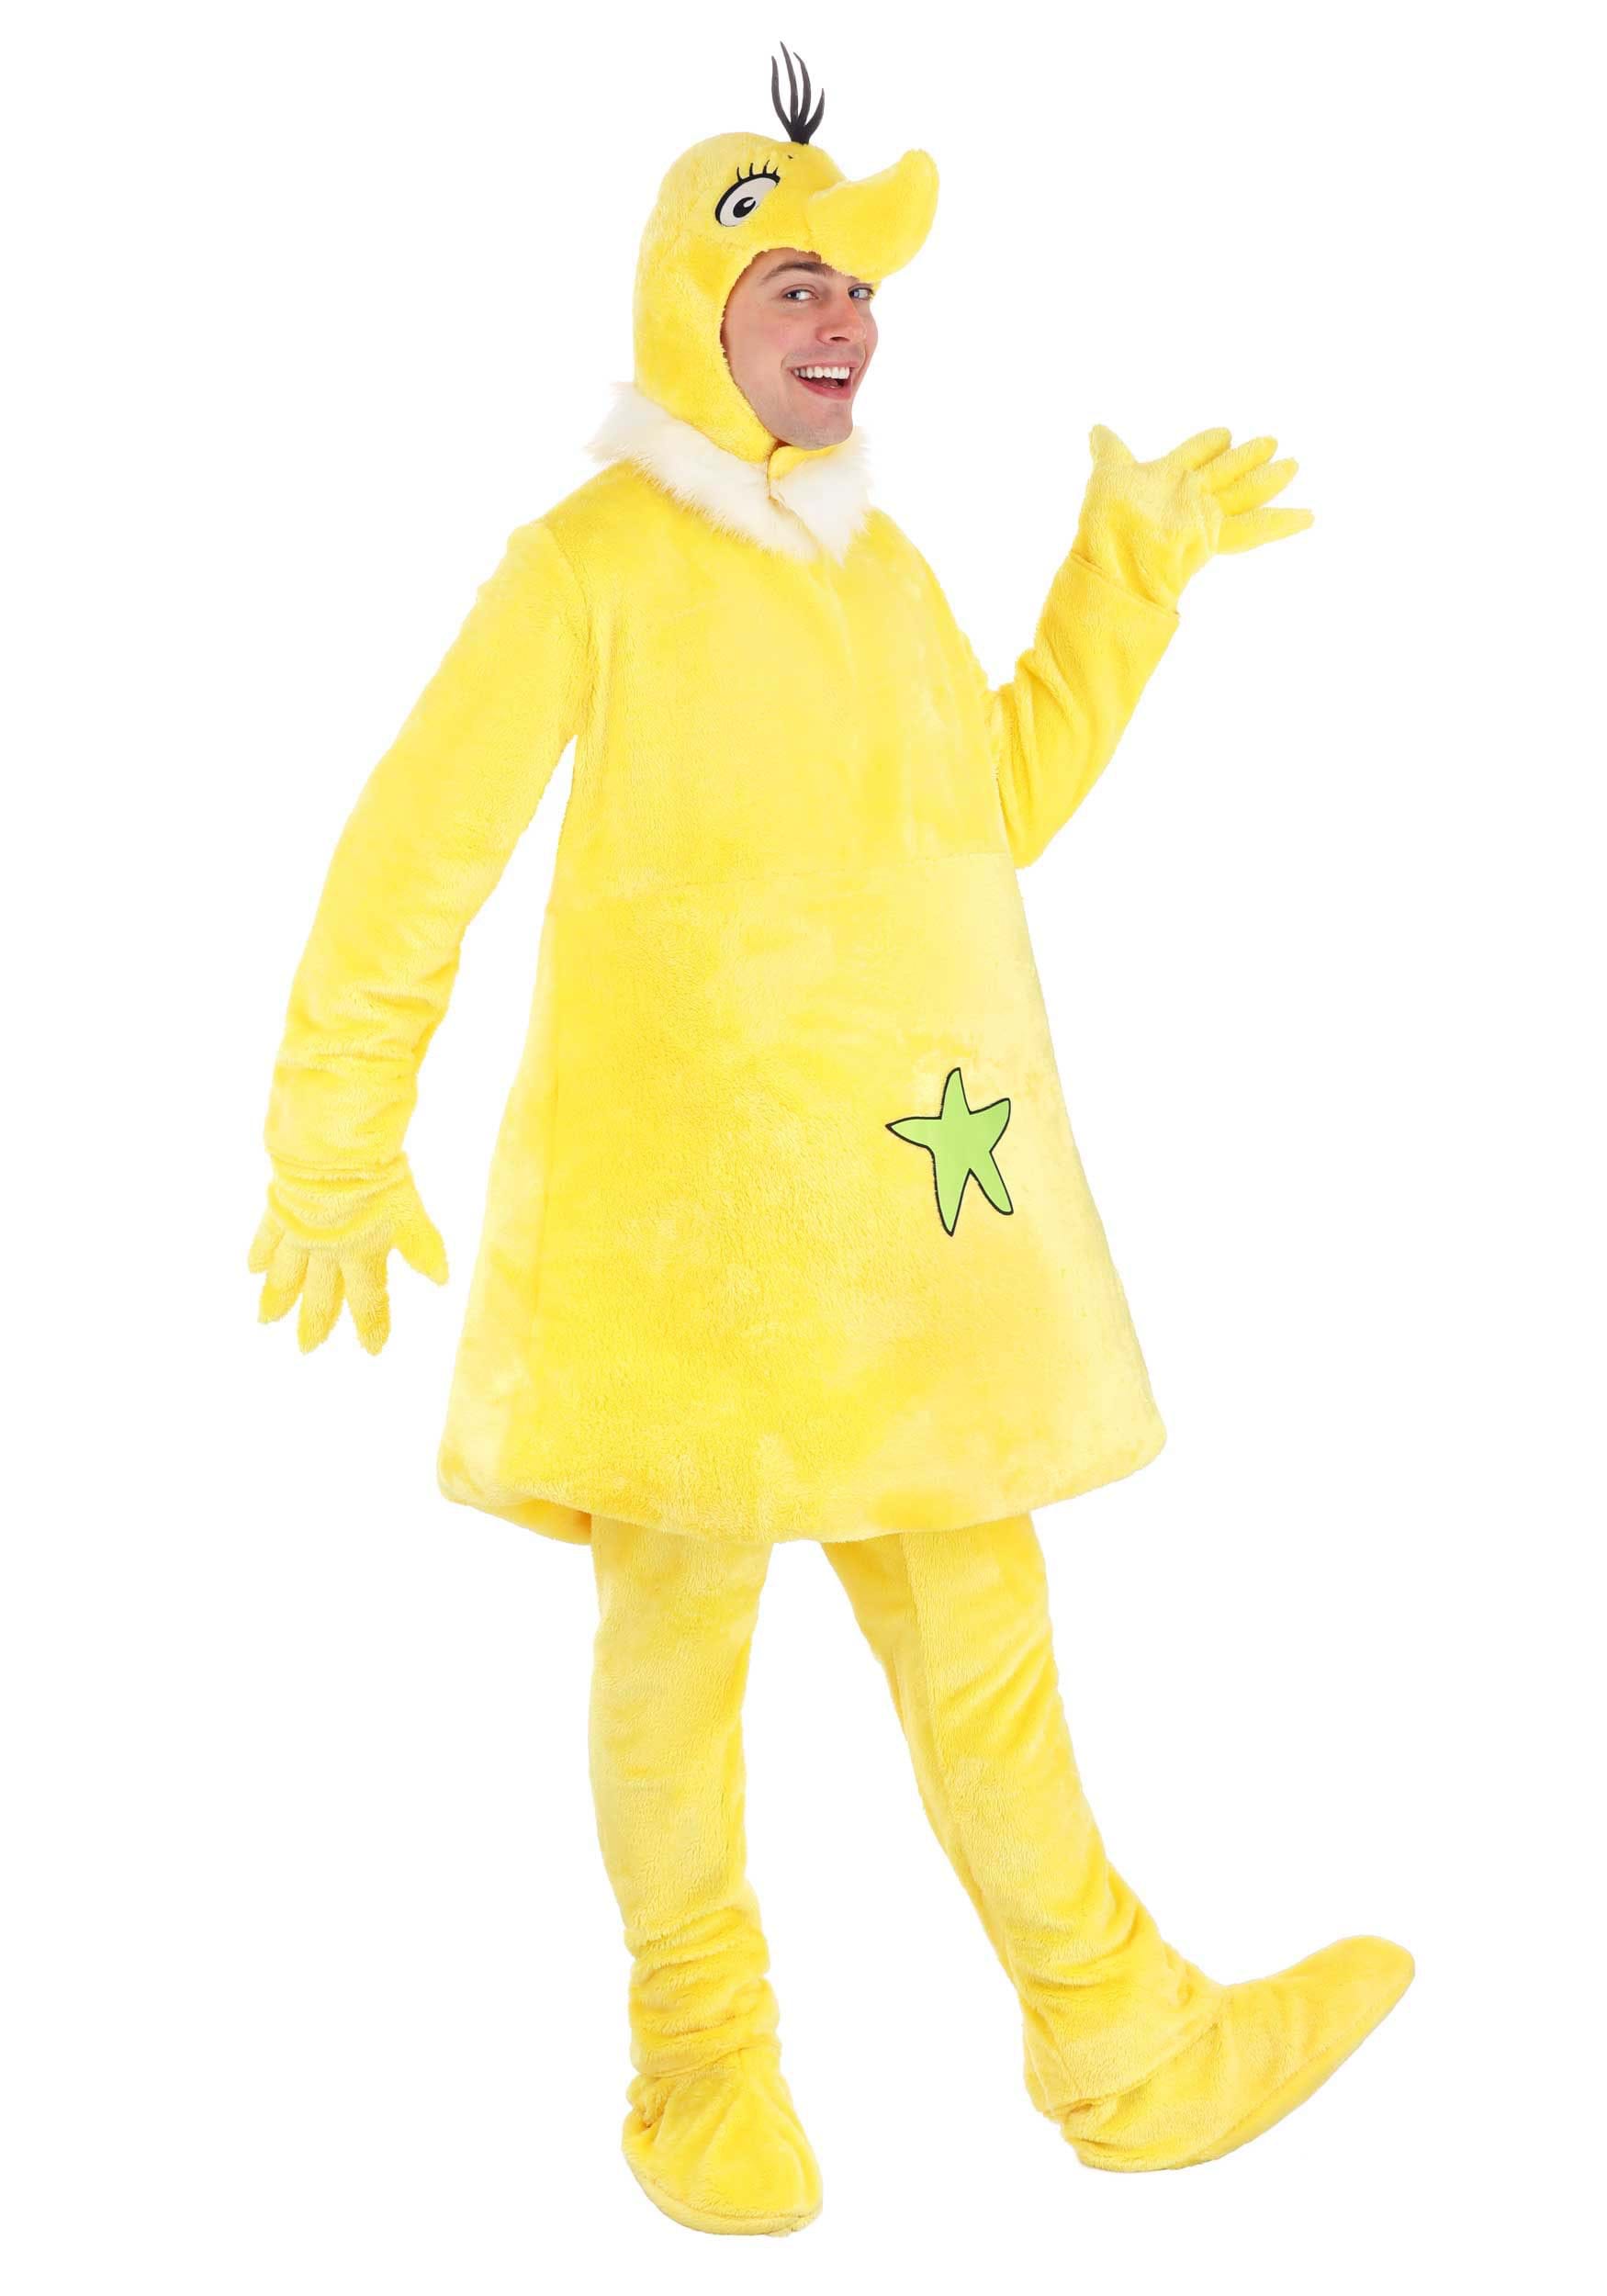 Photos - Fancy Dress FUN Costumes Dr. Seuss Star Bellied Sneetch Costume for Adults Green/W